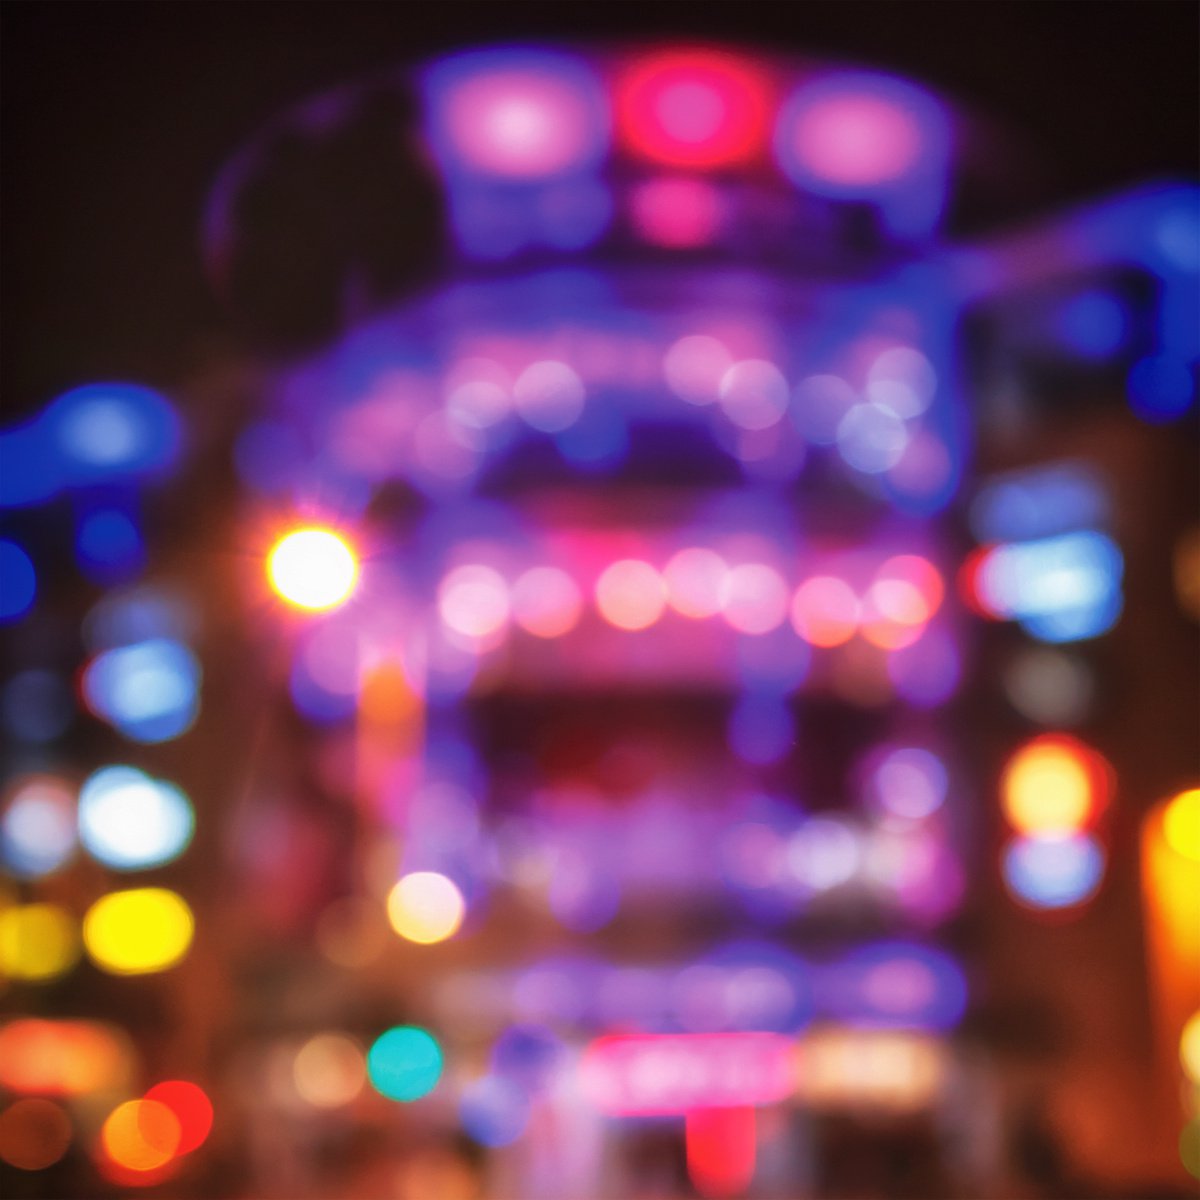 City Lights 5. Limited Edition Abstract Photograph Print #1/15. Nighttime abstract photog... by Graham Briggs